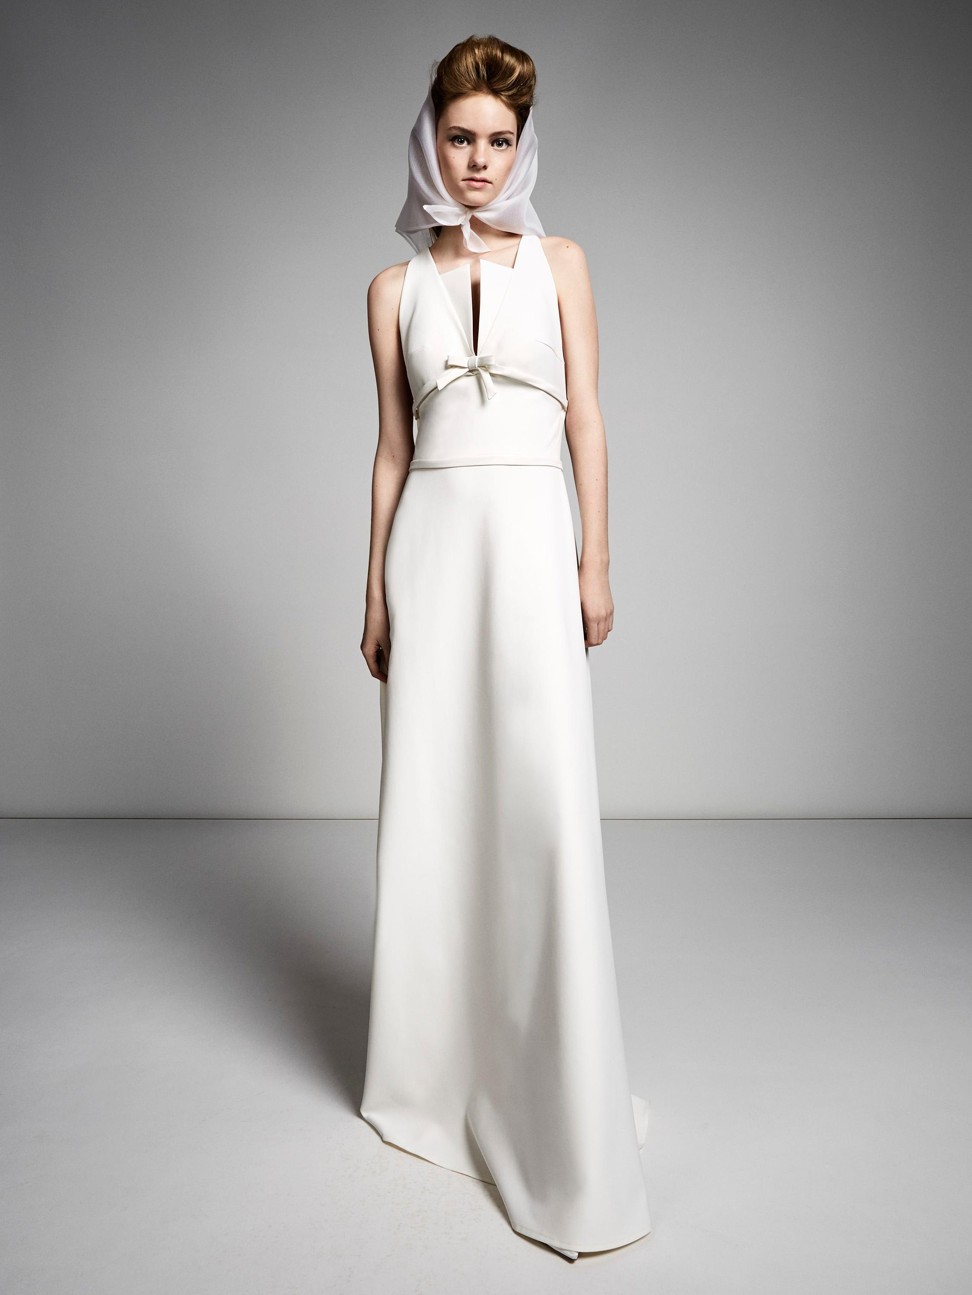 A vintage Viktor & Rolf A-line gown embellished with a cross back and a petite bow